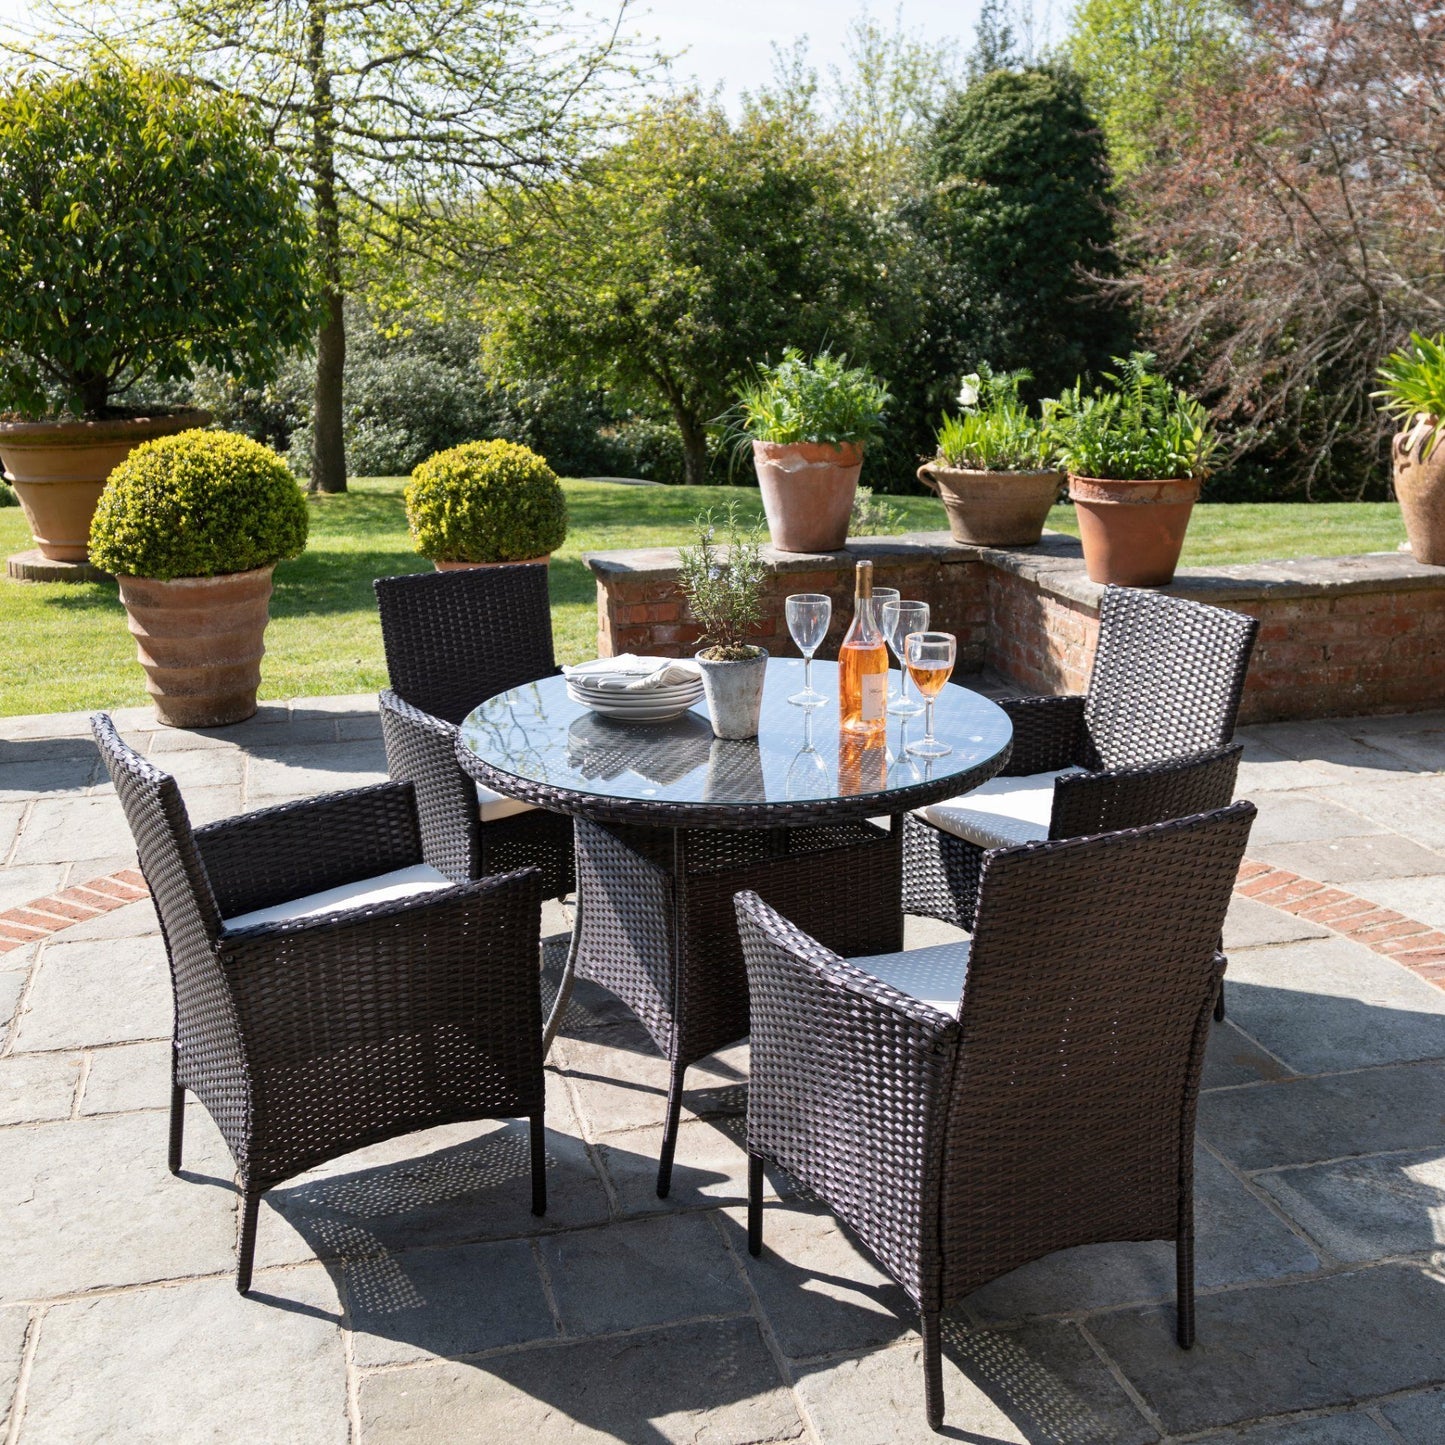 4 Seater Rattan Round Dining Set with Parasol - Brown - Rattan Garden Furniture - In Stock Date - 30th June 2020 - Laura James